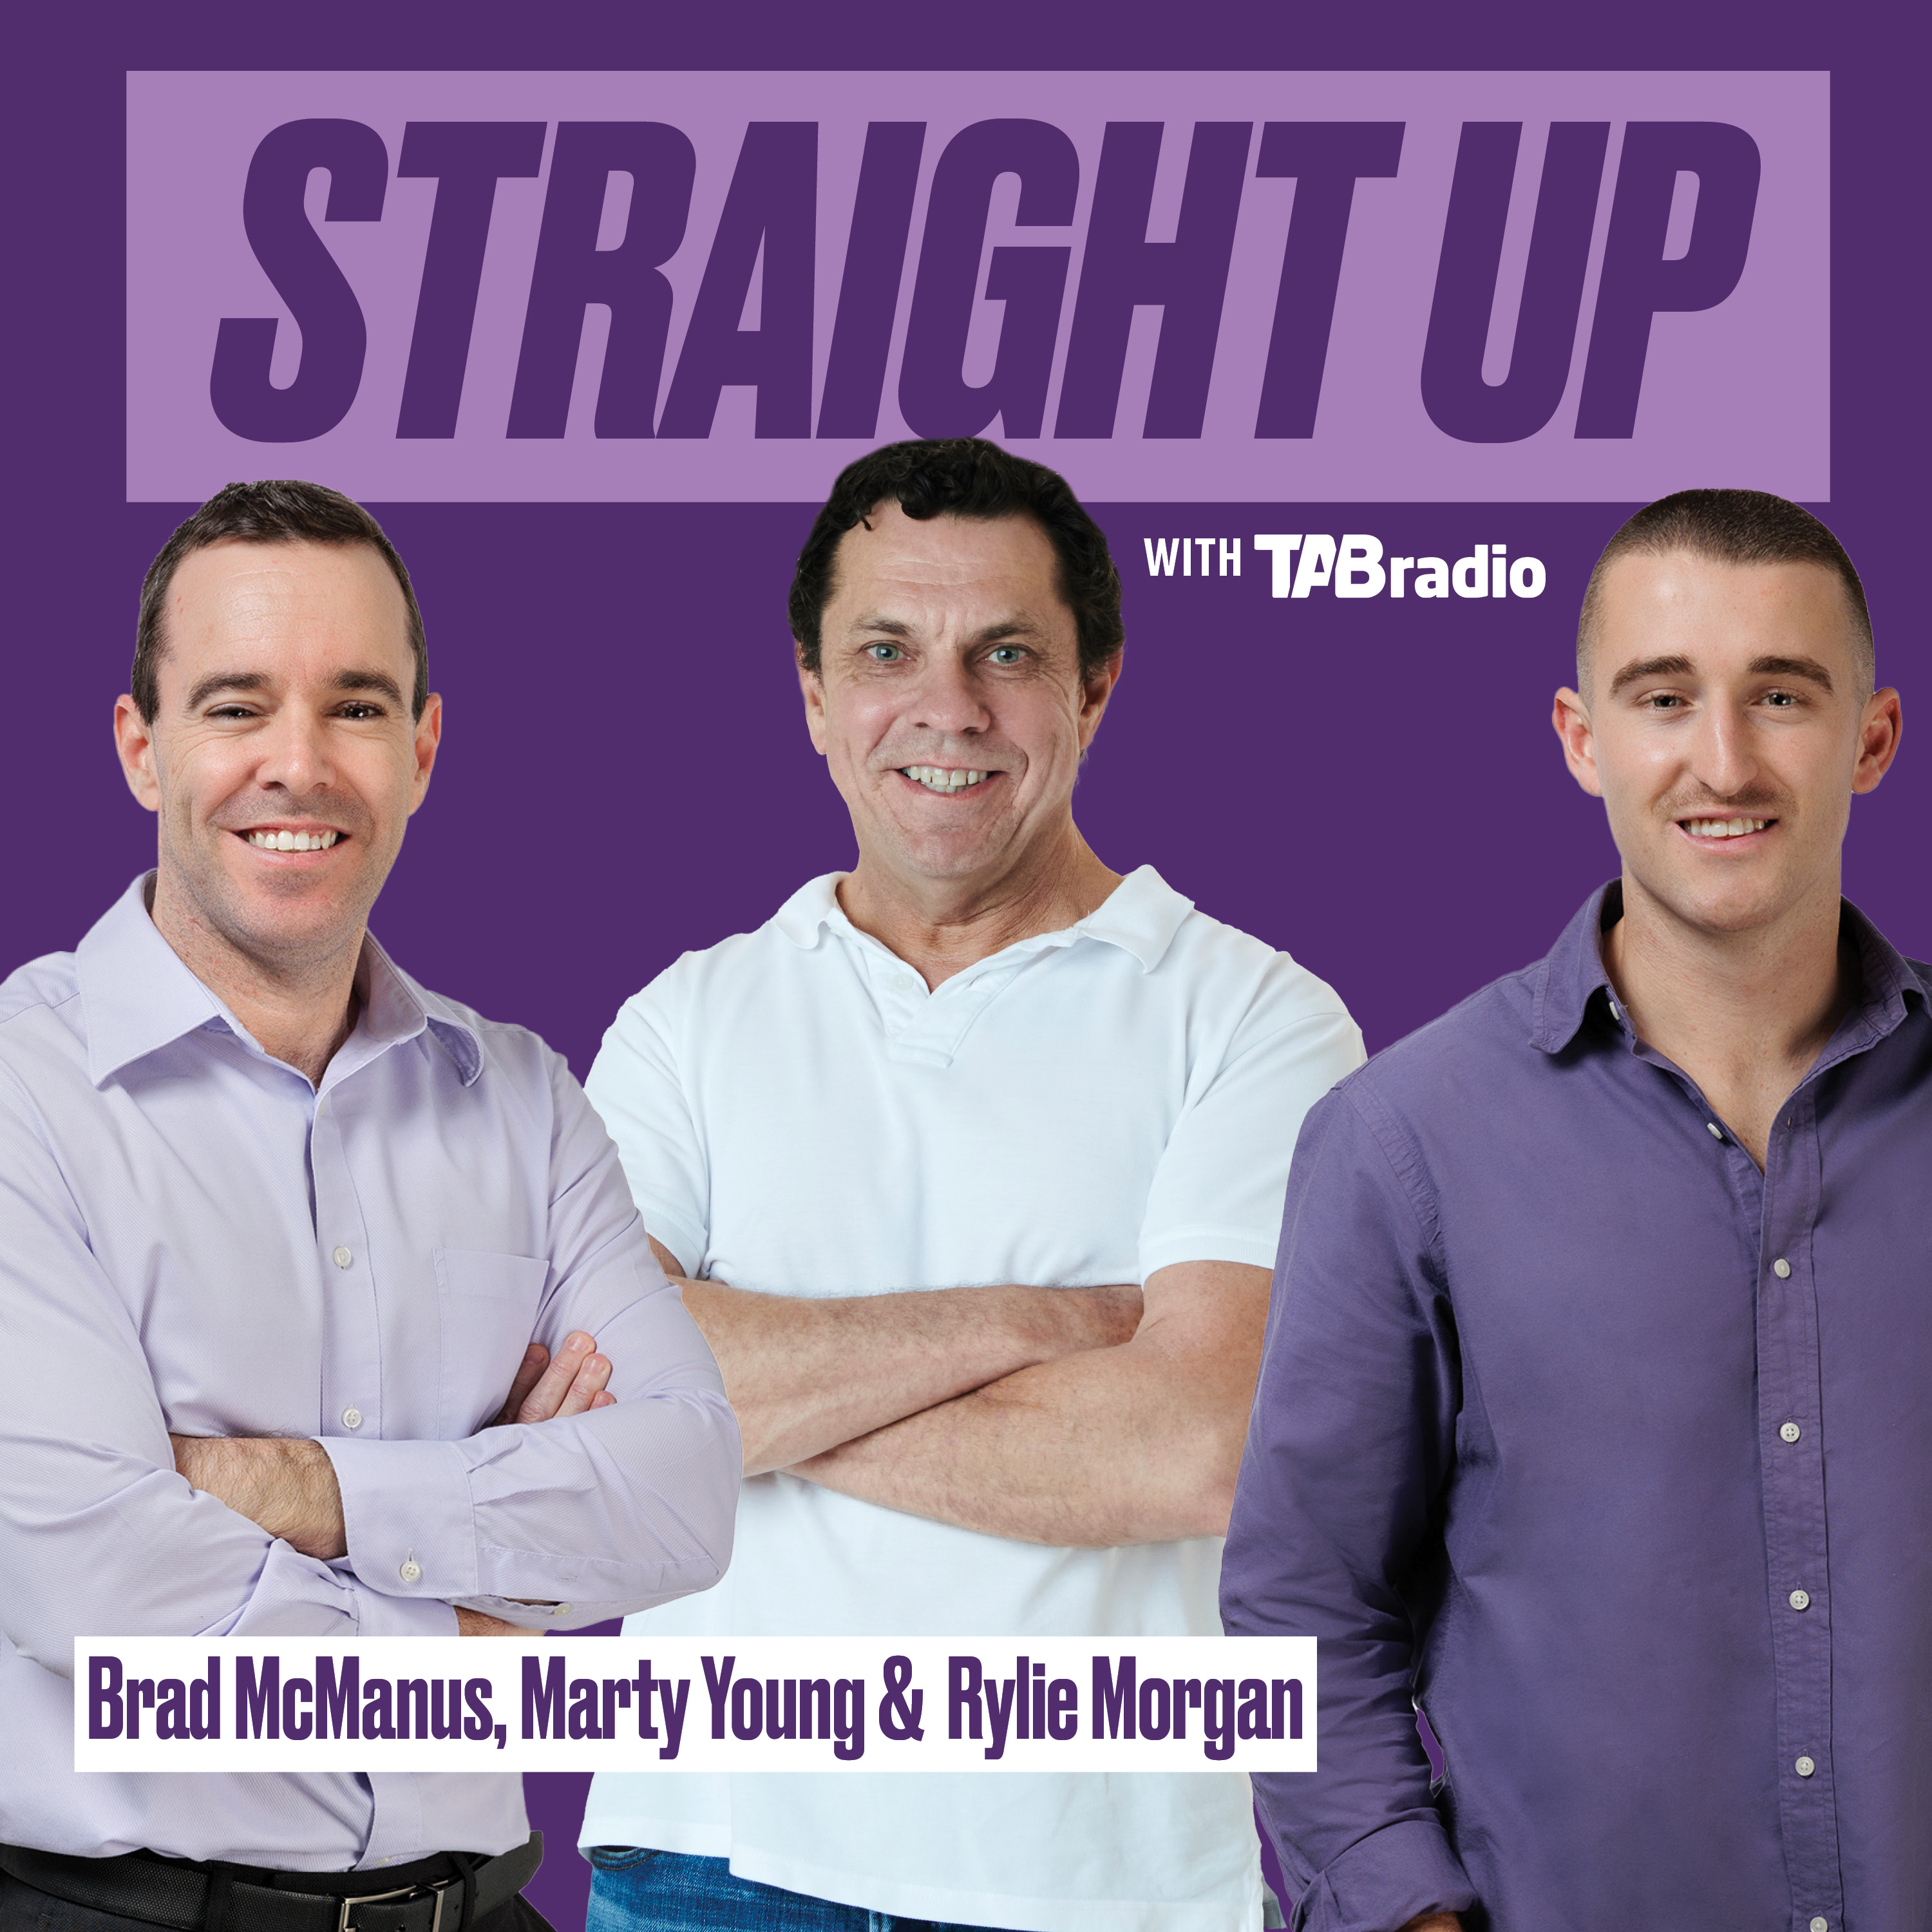 Episode 38 - Straight Up with TABradio - Marty Young, Rylie Morgan & Brad McManus